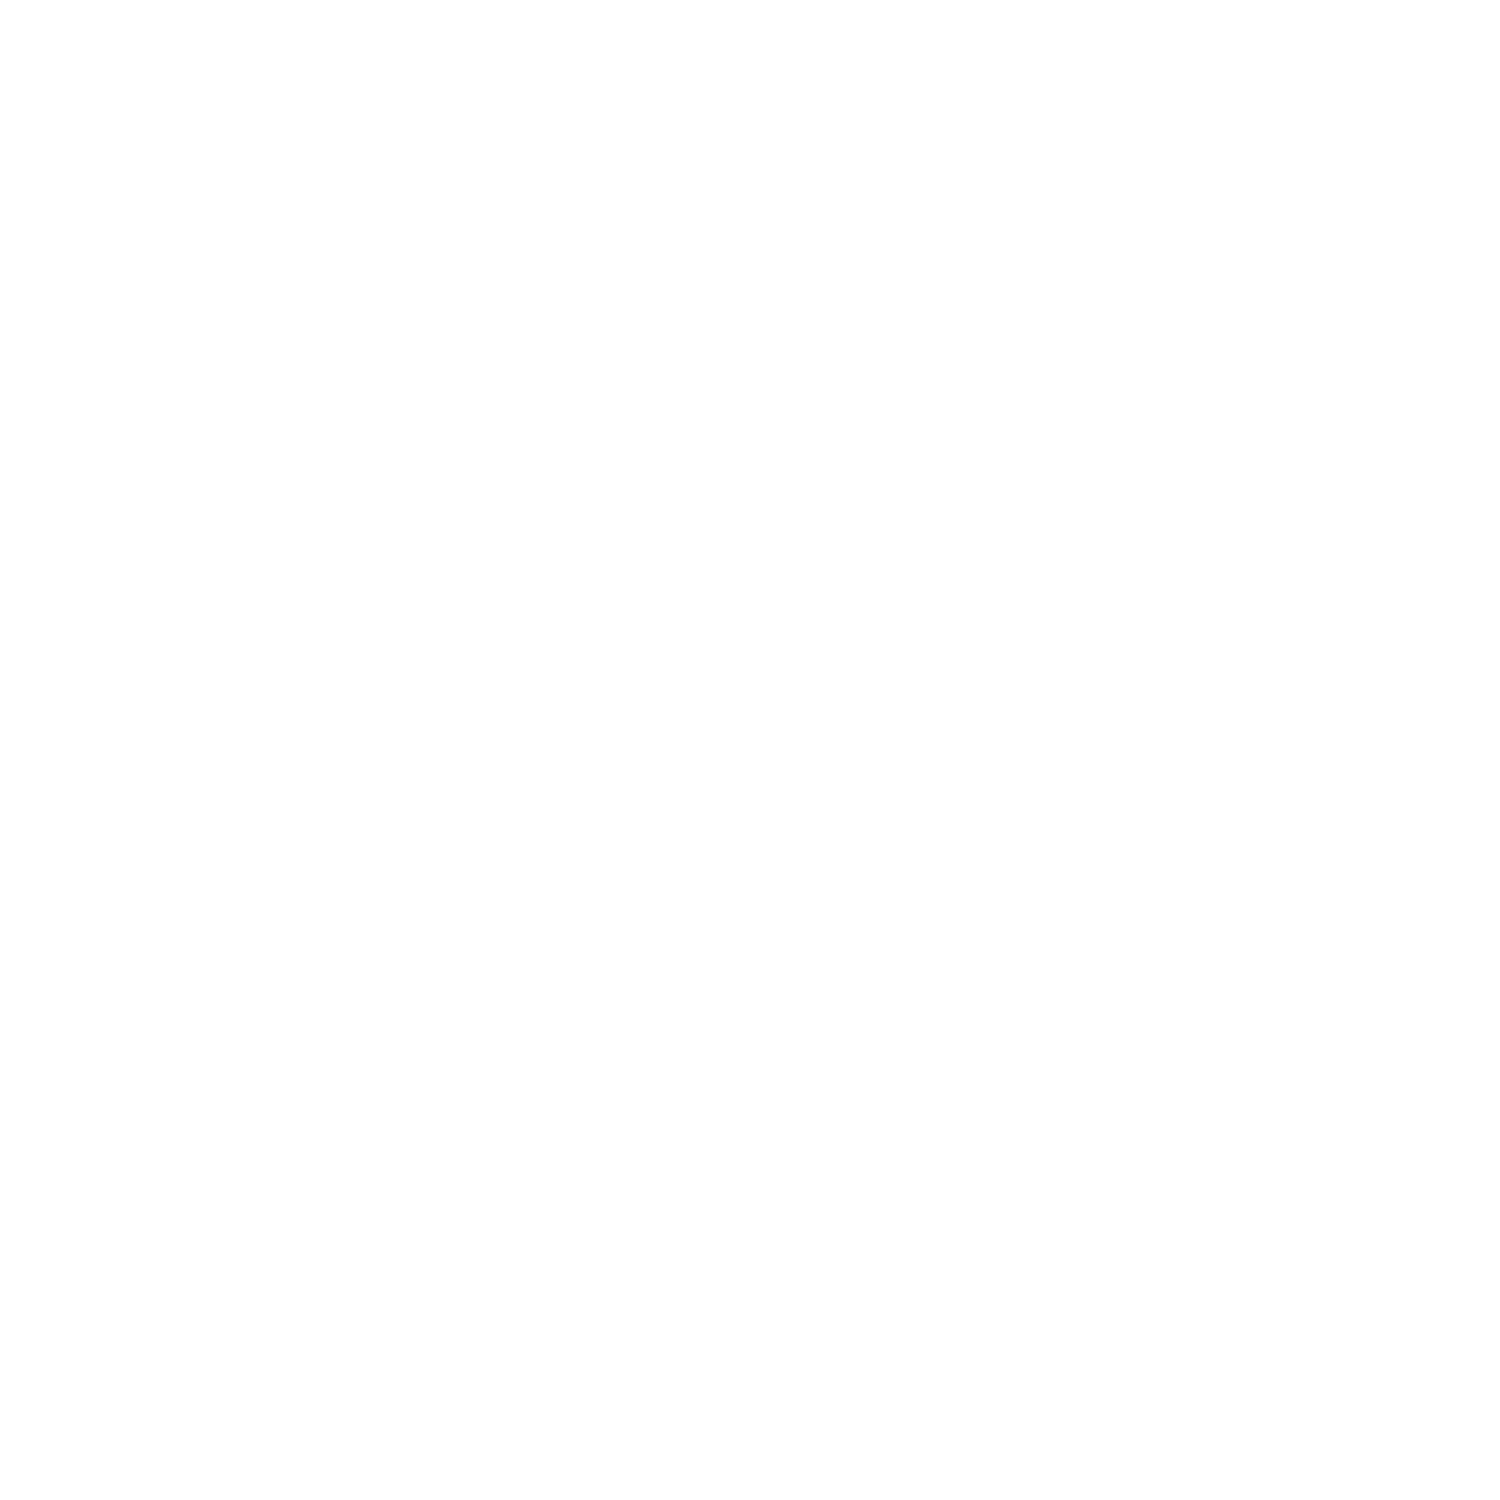 The Chase Petty Foundation